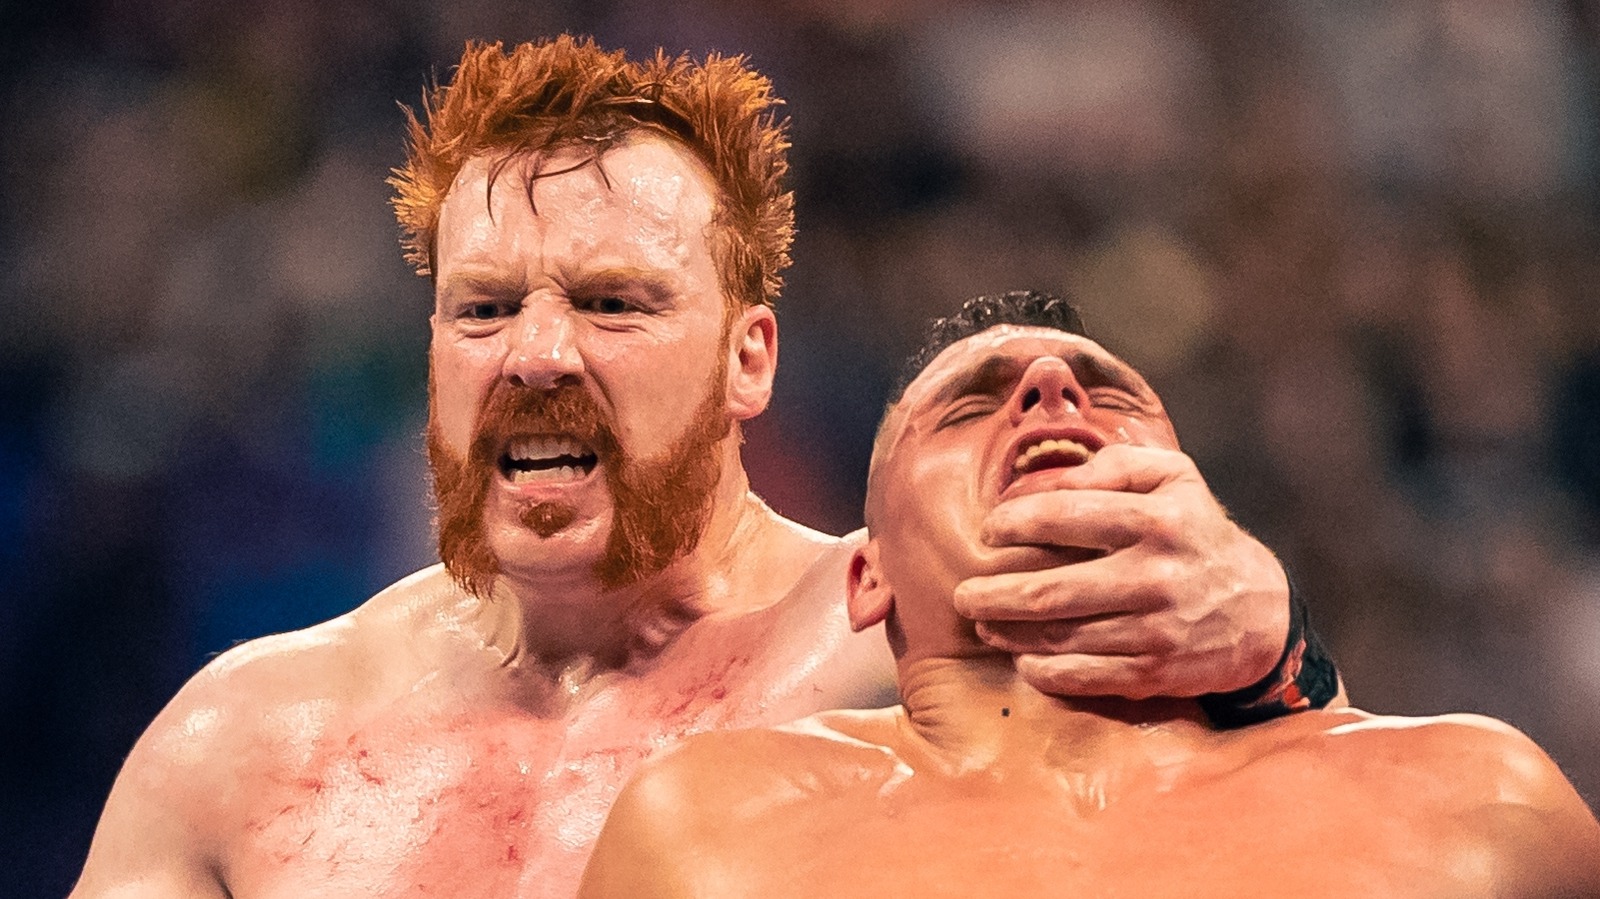 Sheamus Wishes Some Of Roman Reigns' Screentime Would Go To The Rest Of WWE's Roster